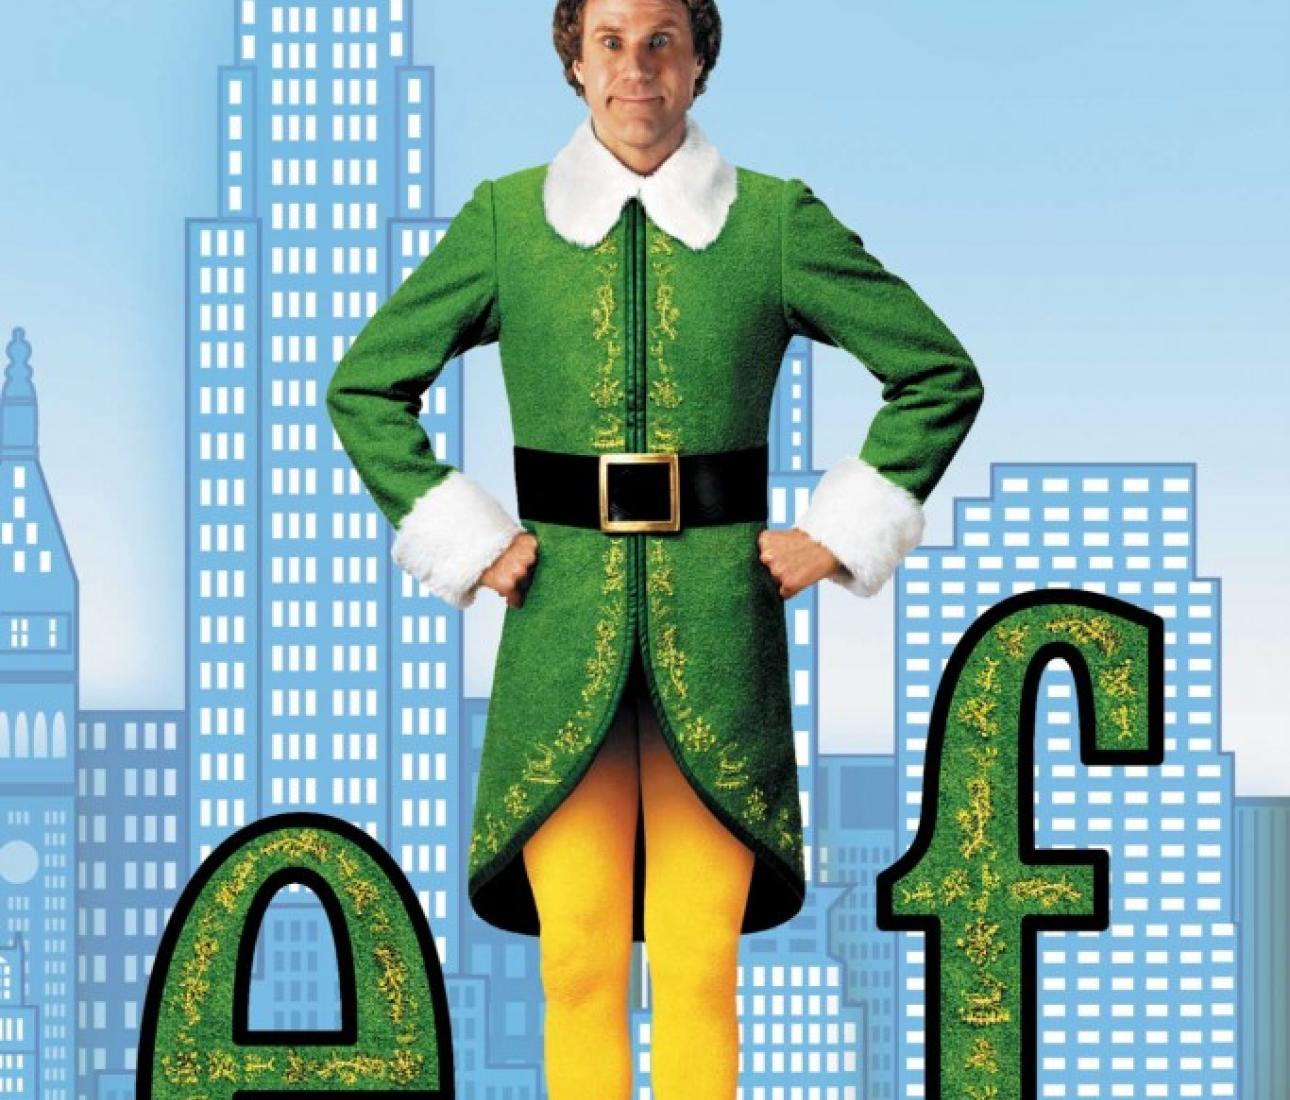 Movies for Minis | Elf (2003)